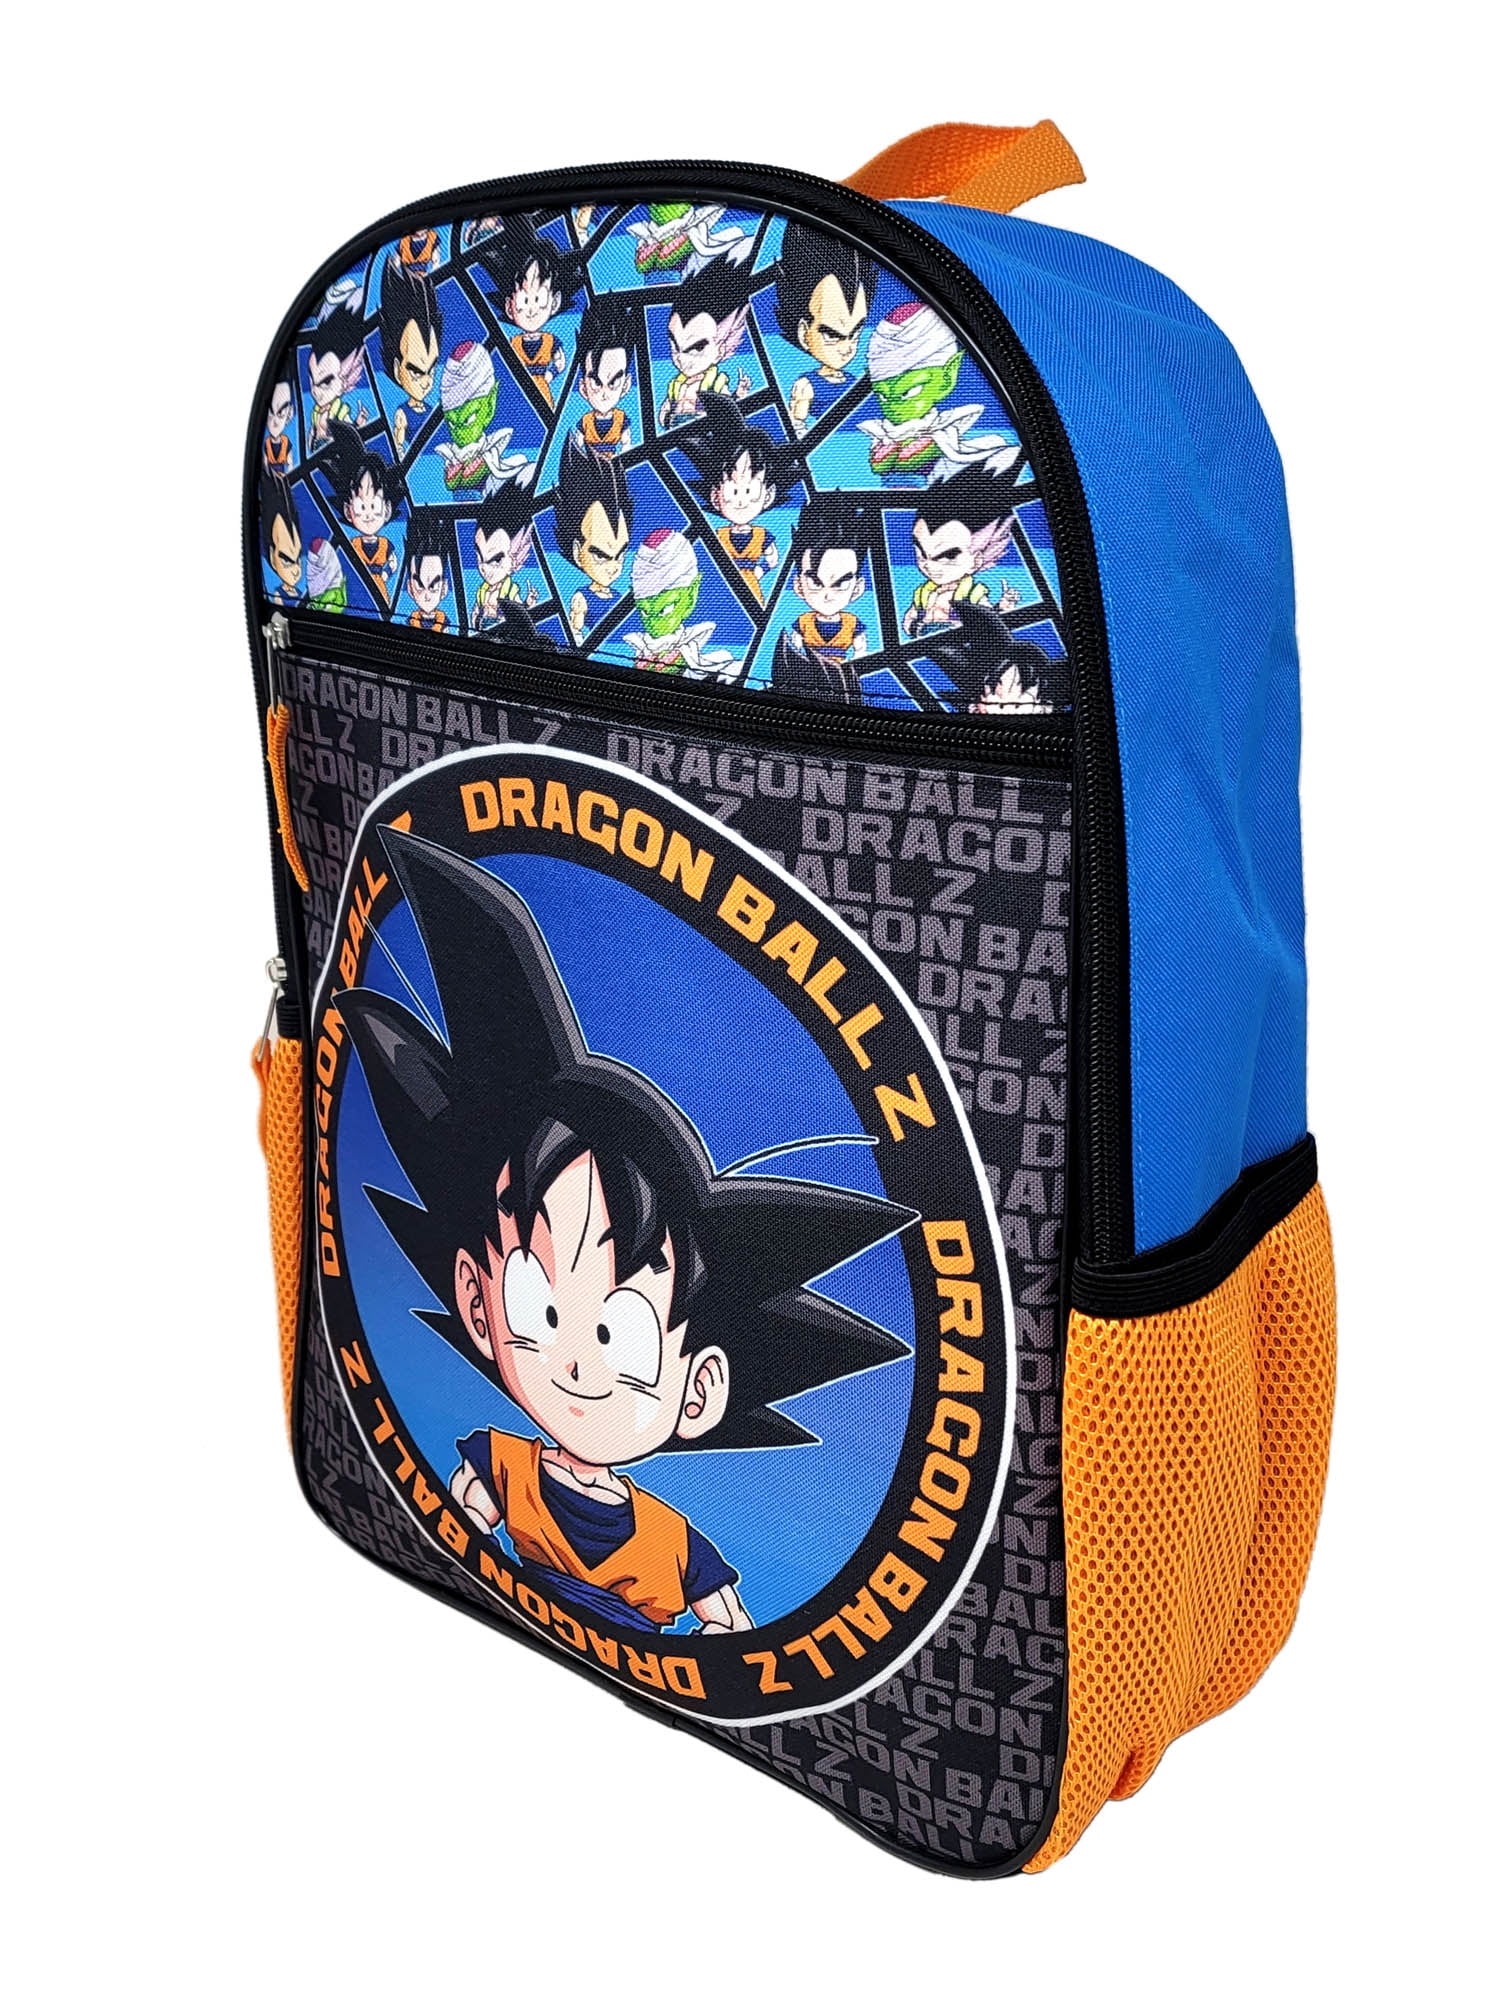 Dragon Ball Z Kids' Backpack with Lunch Bag 4-Piece Set Multi